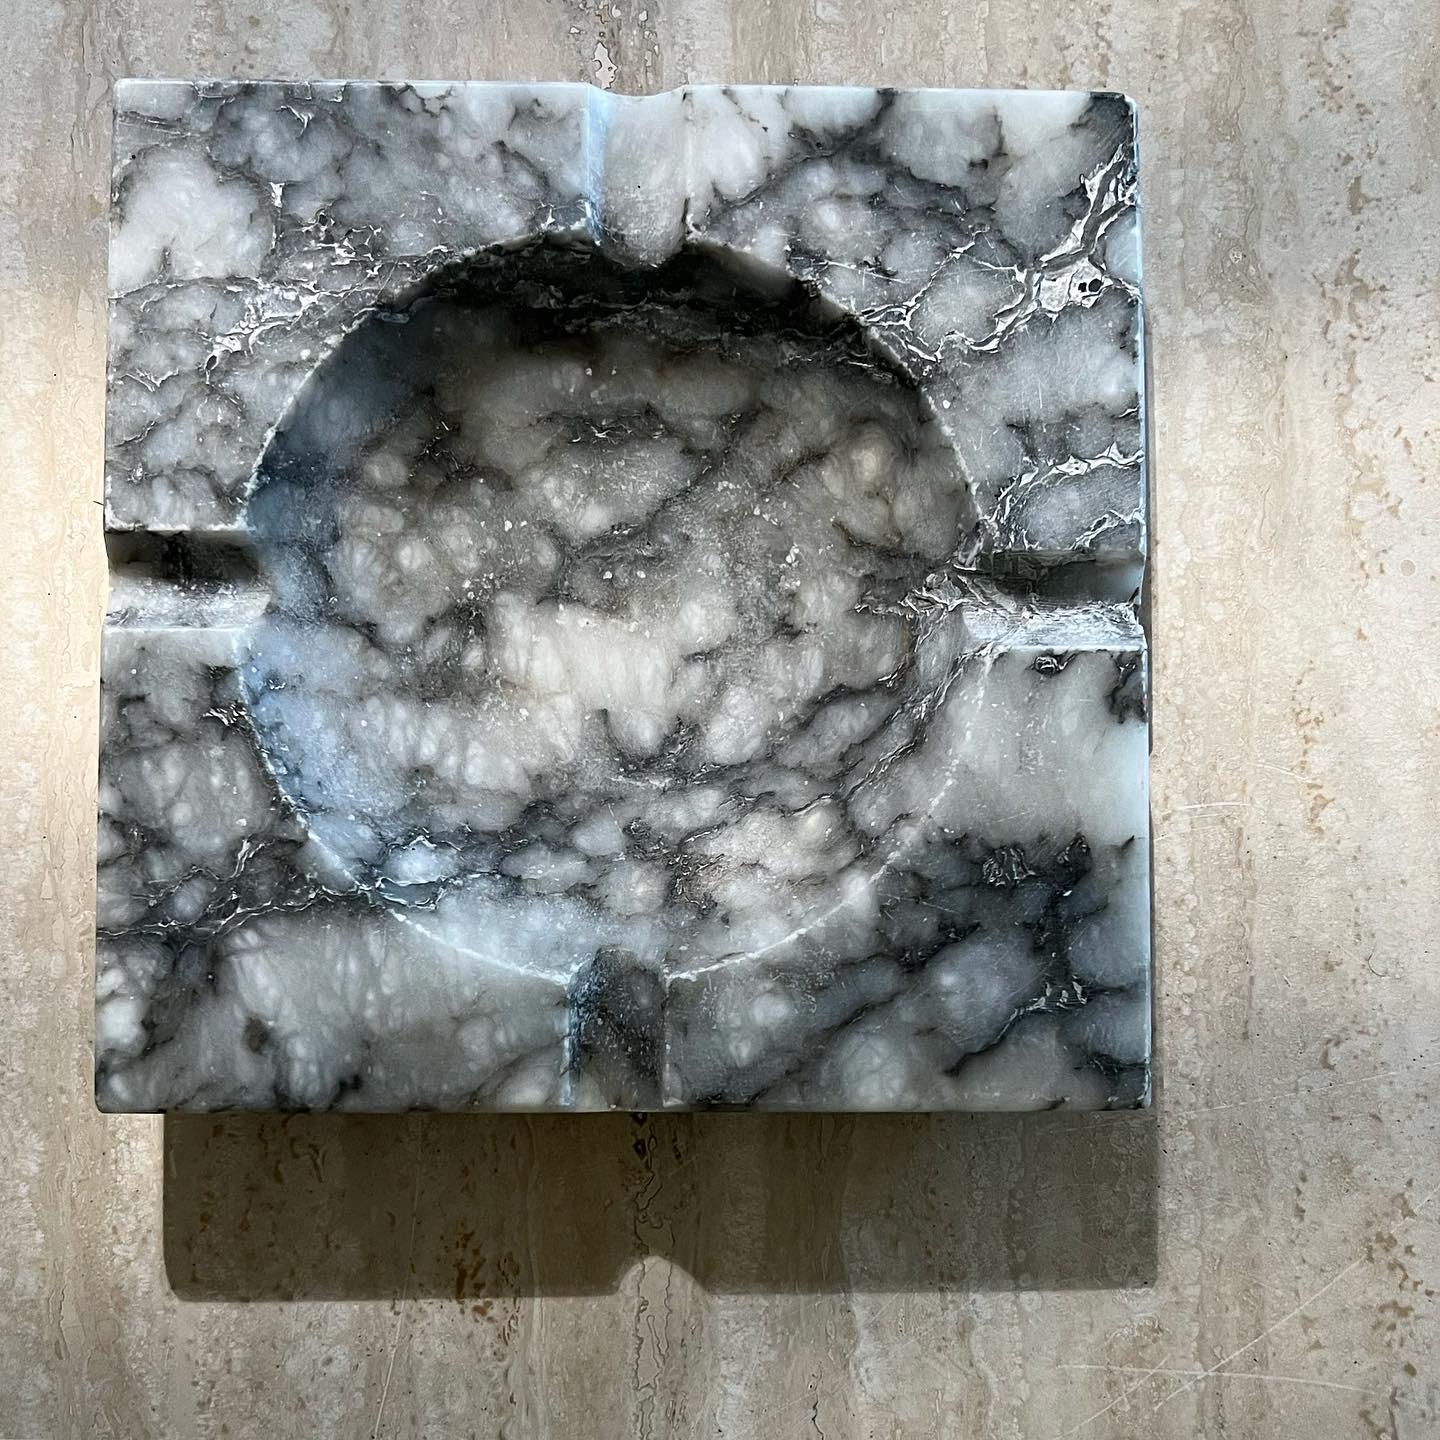 A large vintage Italian marble ashtray, 1960s. Tones of bone and charcoal and featuring a curved underbelly. Pick up in LA or worldwide shipping available.
Dimensions: 8” x 8” x 1.25”.